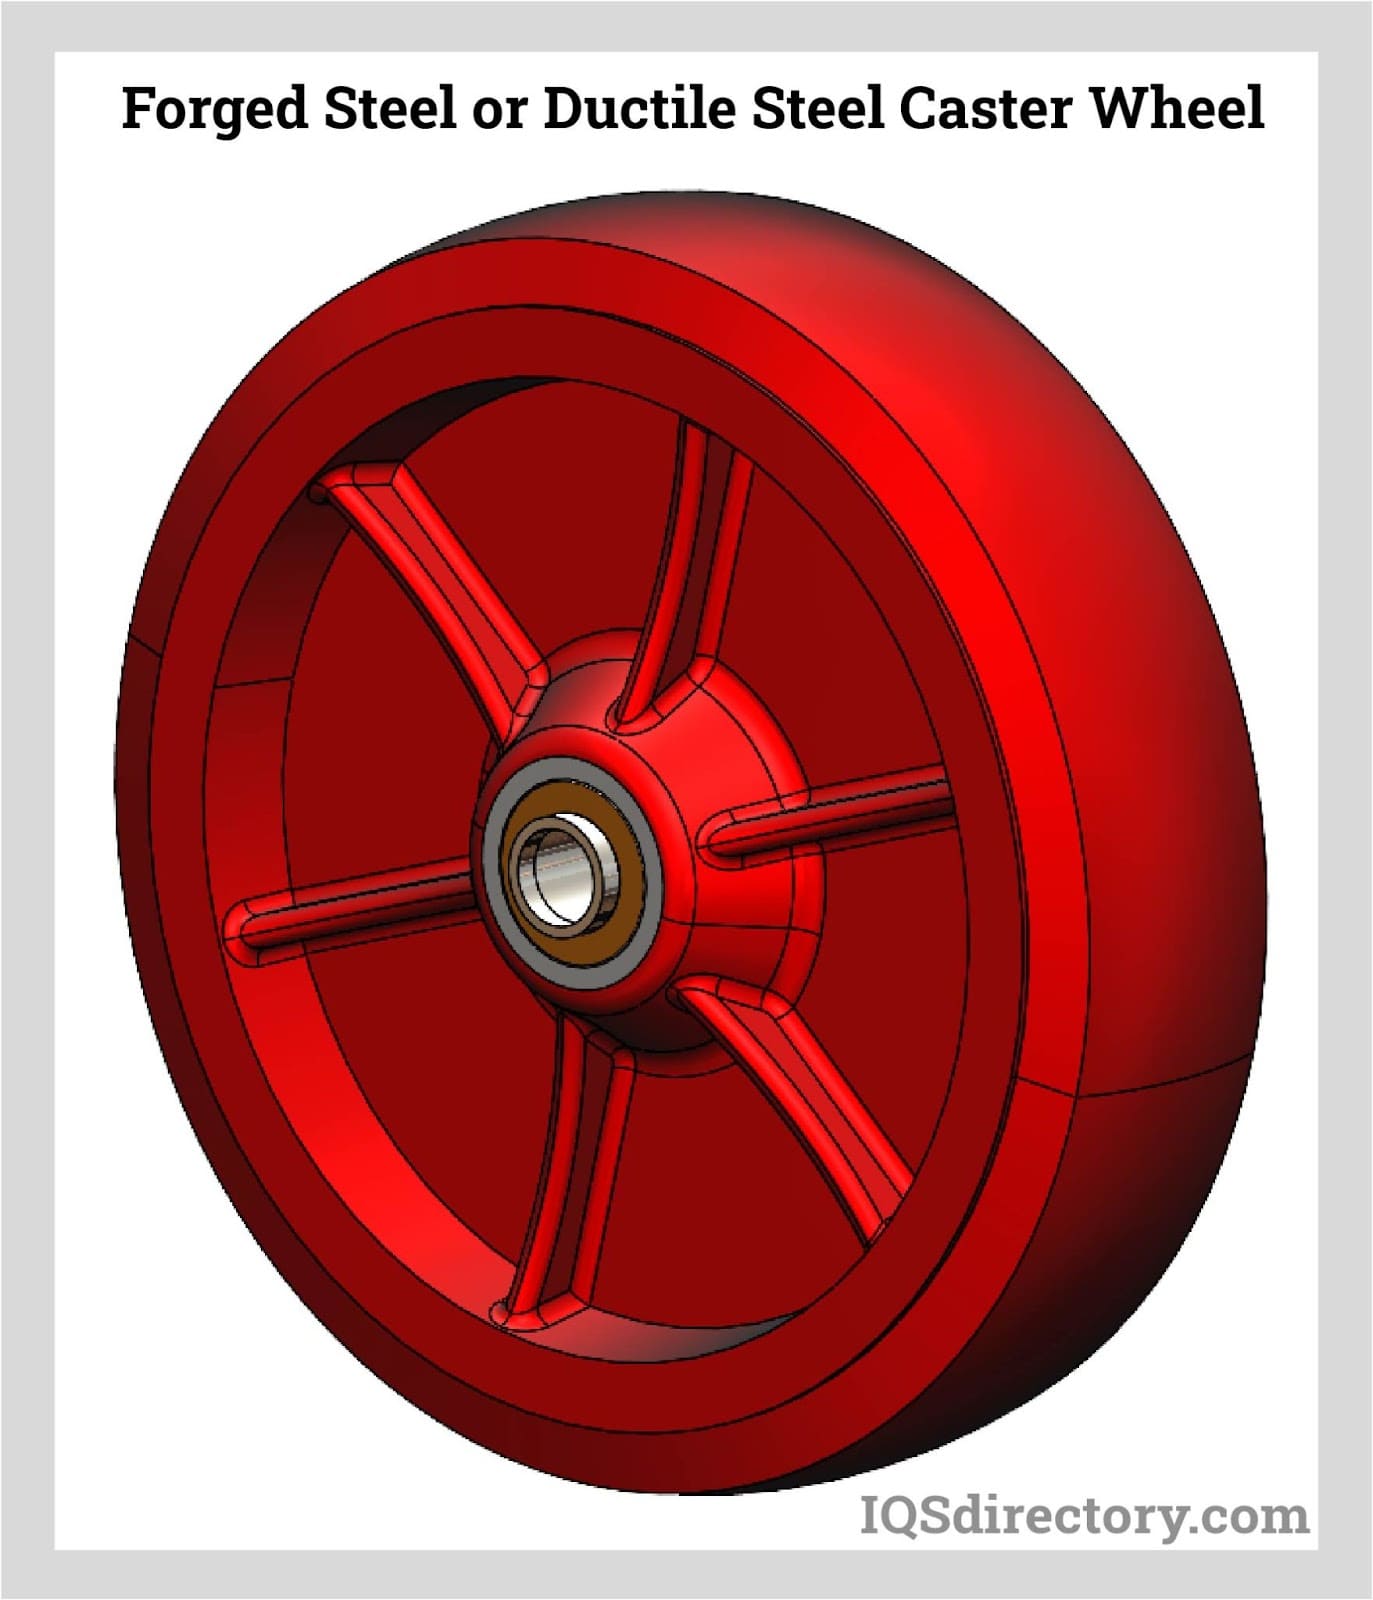 Forged Steel or Ductile Steel Caster Wheel